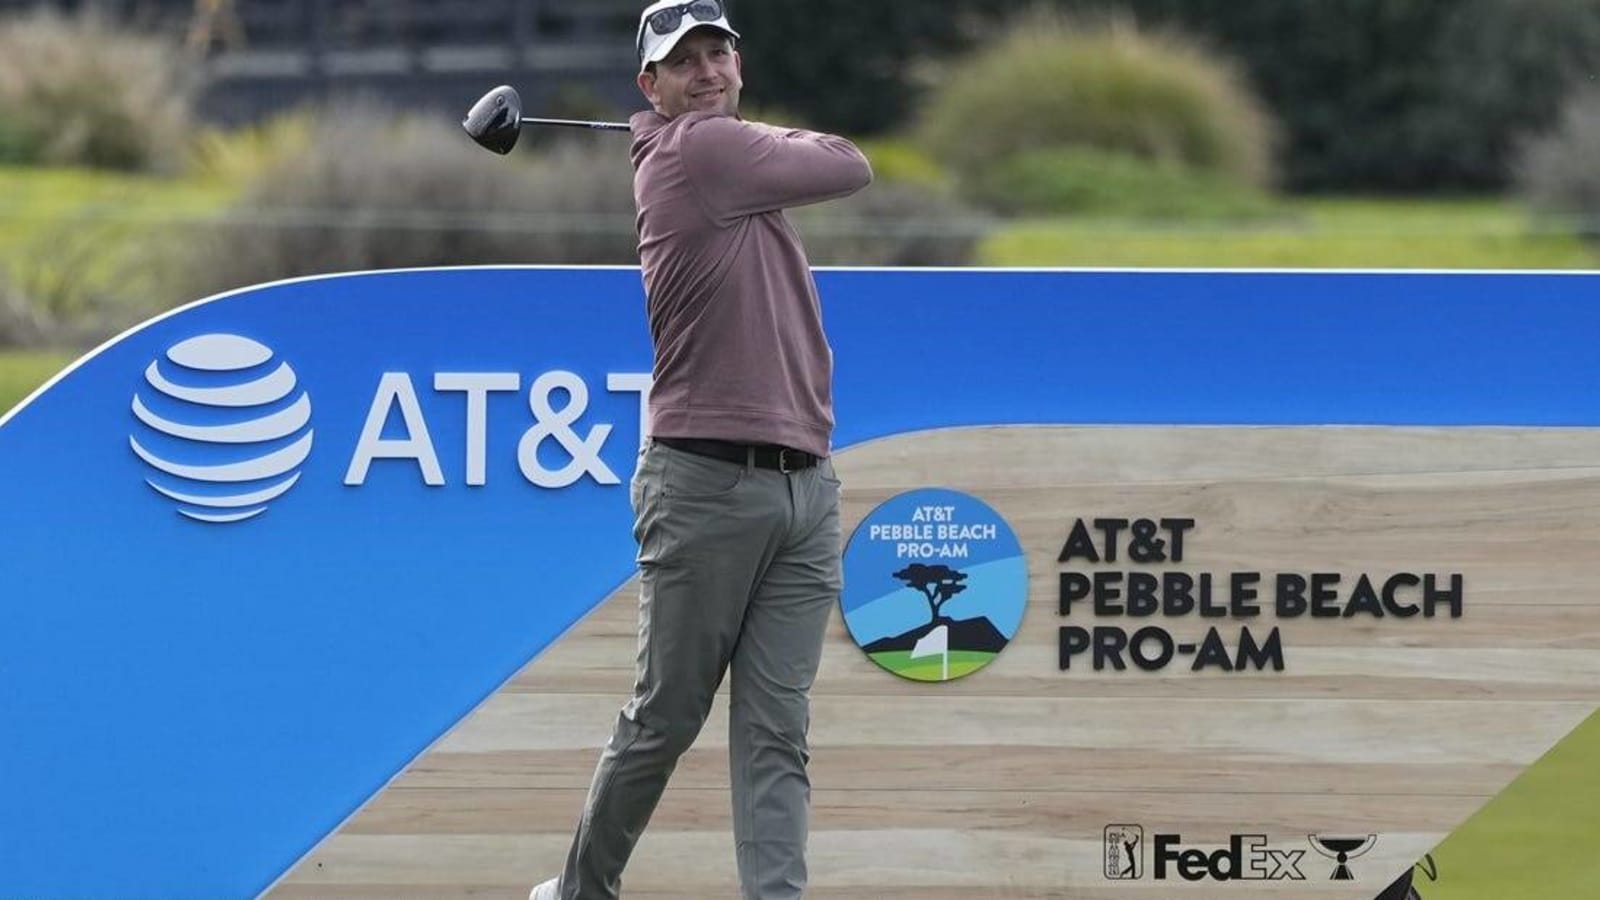 Hank Lebioda leads after one round at Pebble Beach Pro-Am